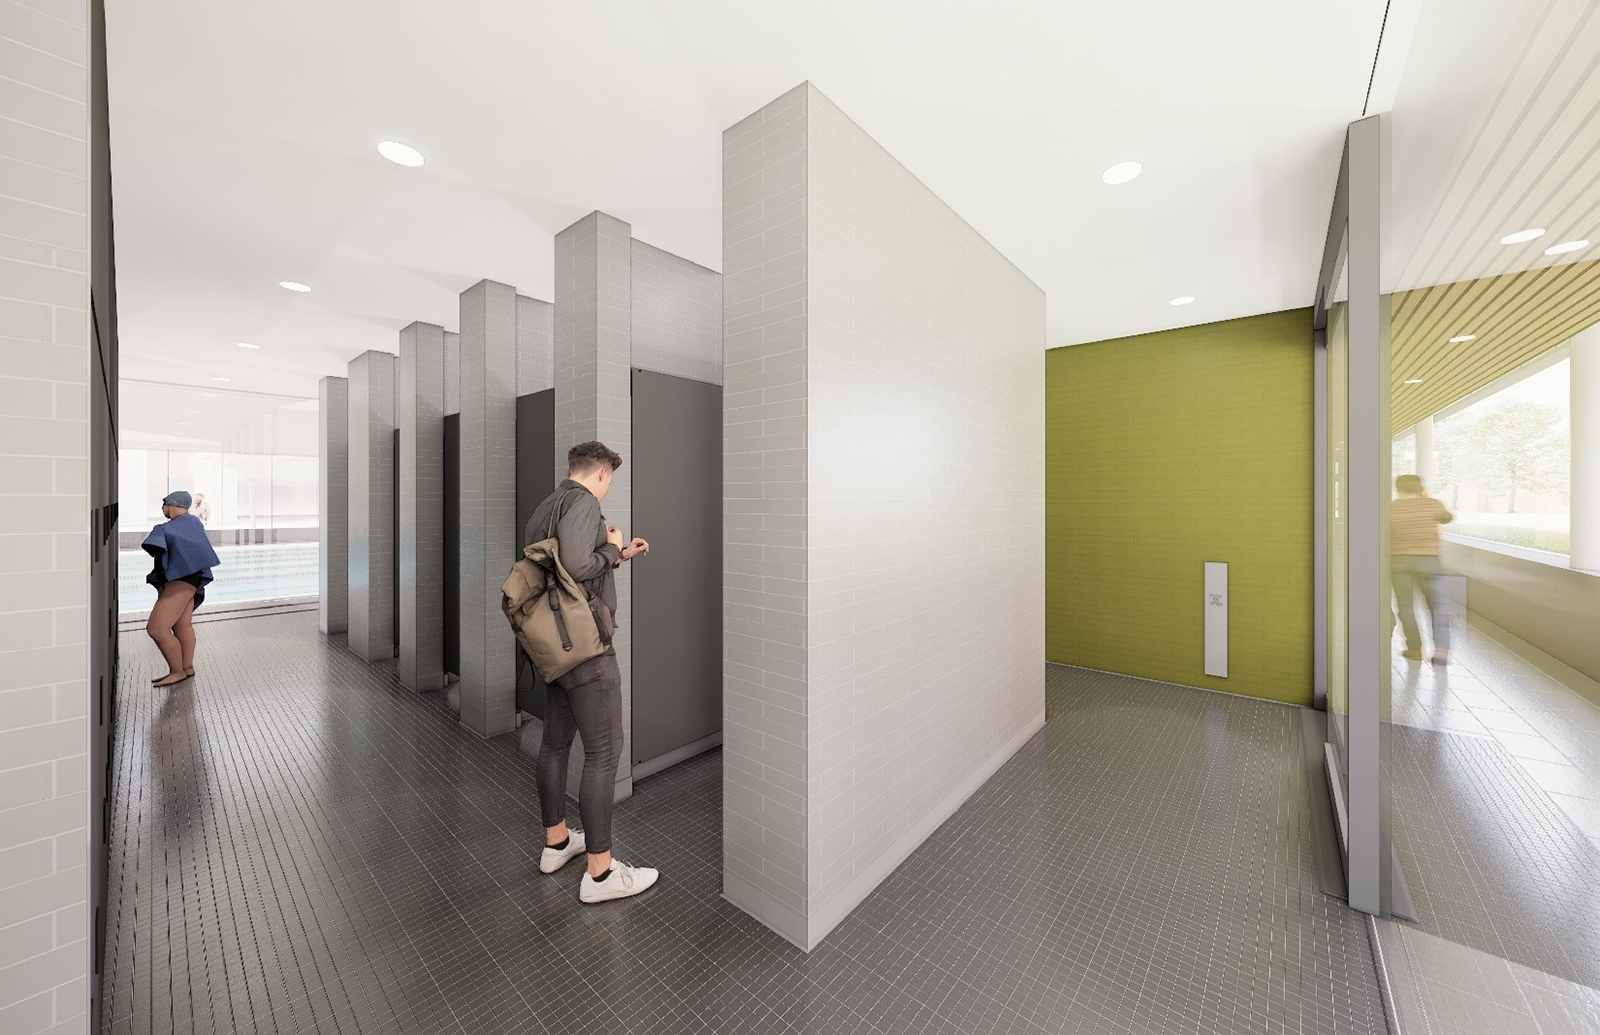 A rendering of the main floor change room stalls. The rooms are accessible to people of any gender identity. All changing takes place inside private stalls. The shared change room space is viewable from the hallway to the east and the pool on the west, with glass walls between each. No changing takes place in shared spaces. Two people are entering separate change stalls.